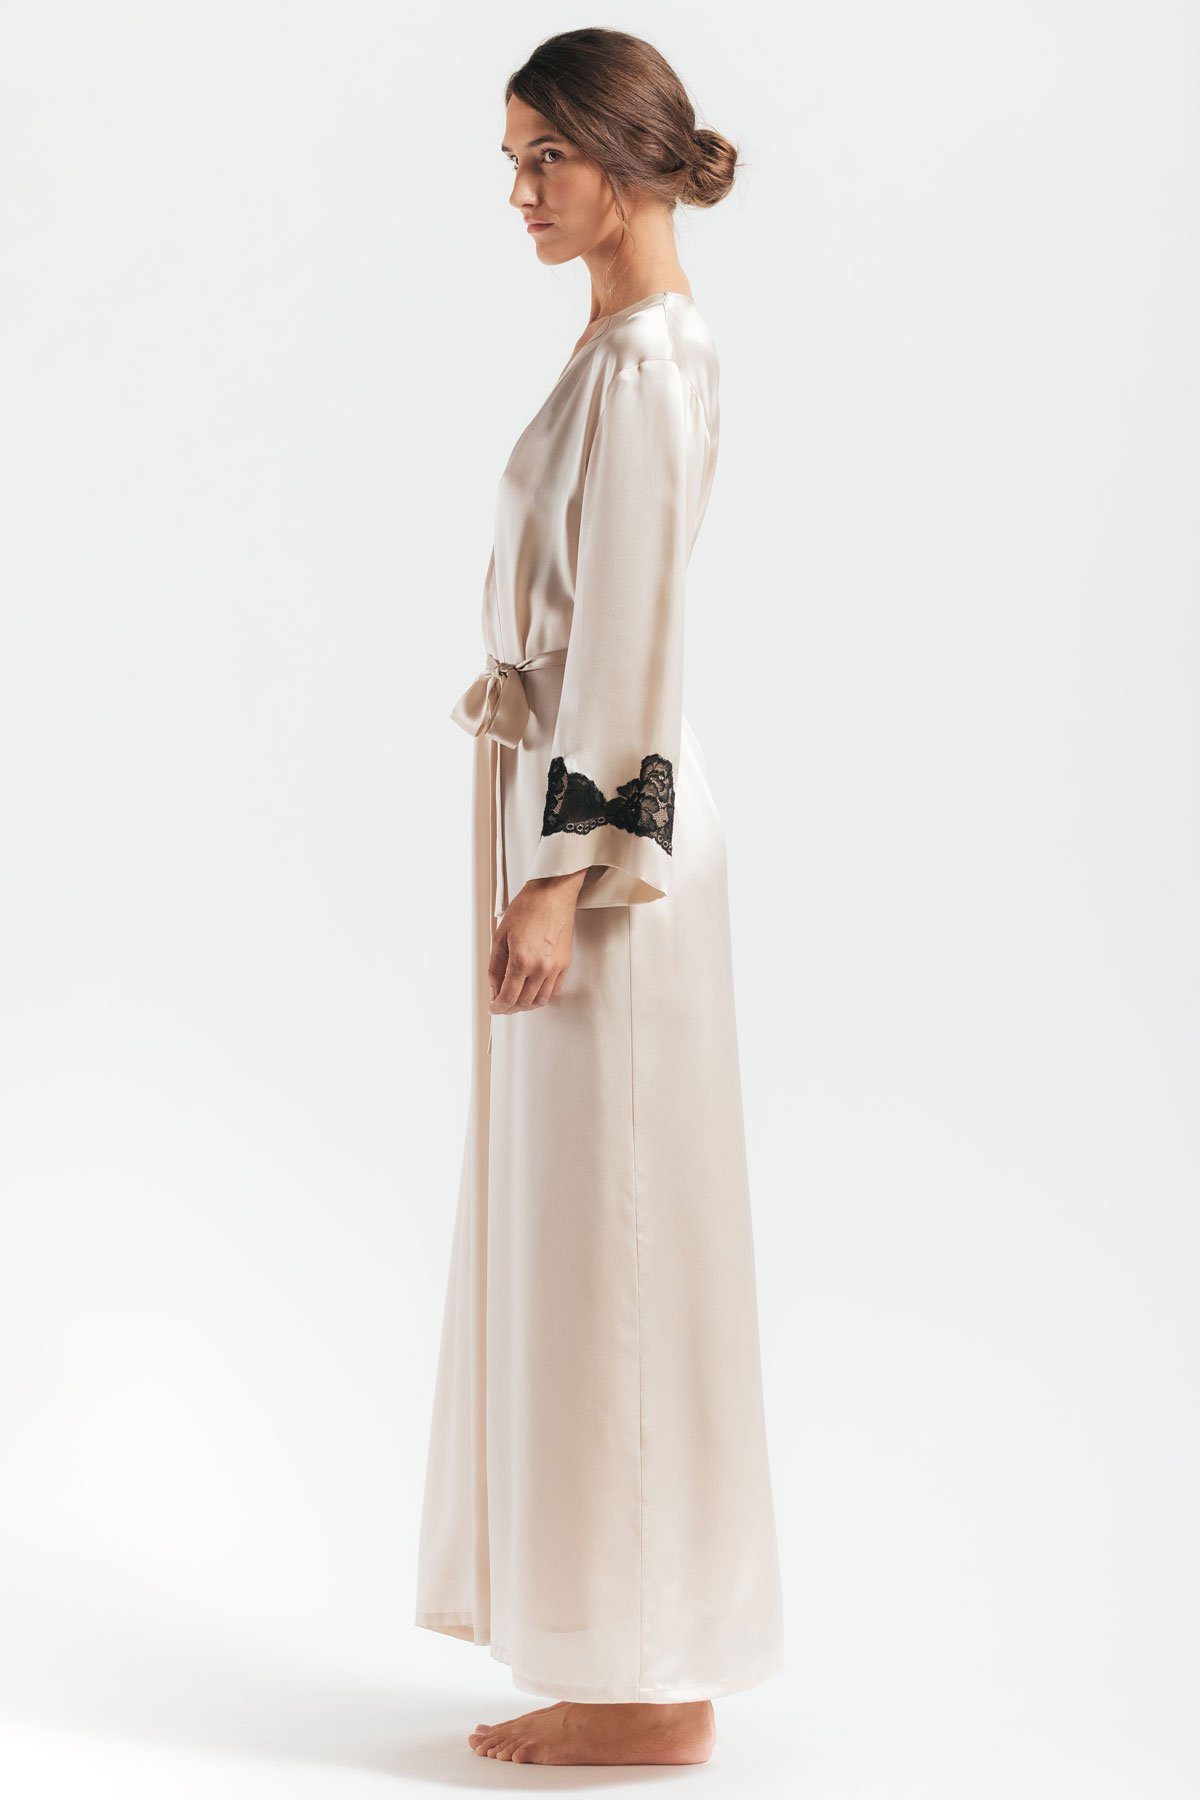 Sideview of model wearing  Morgan Long silk robe in champagne